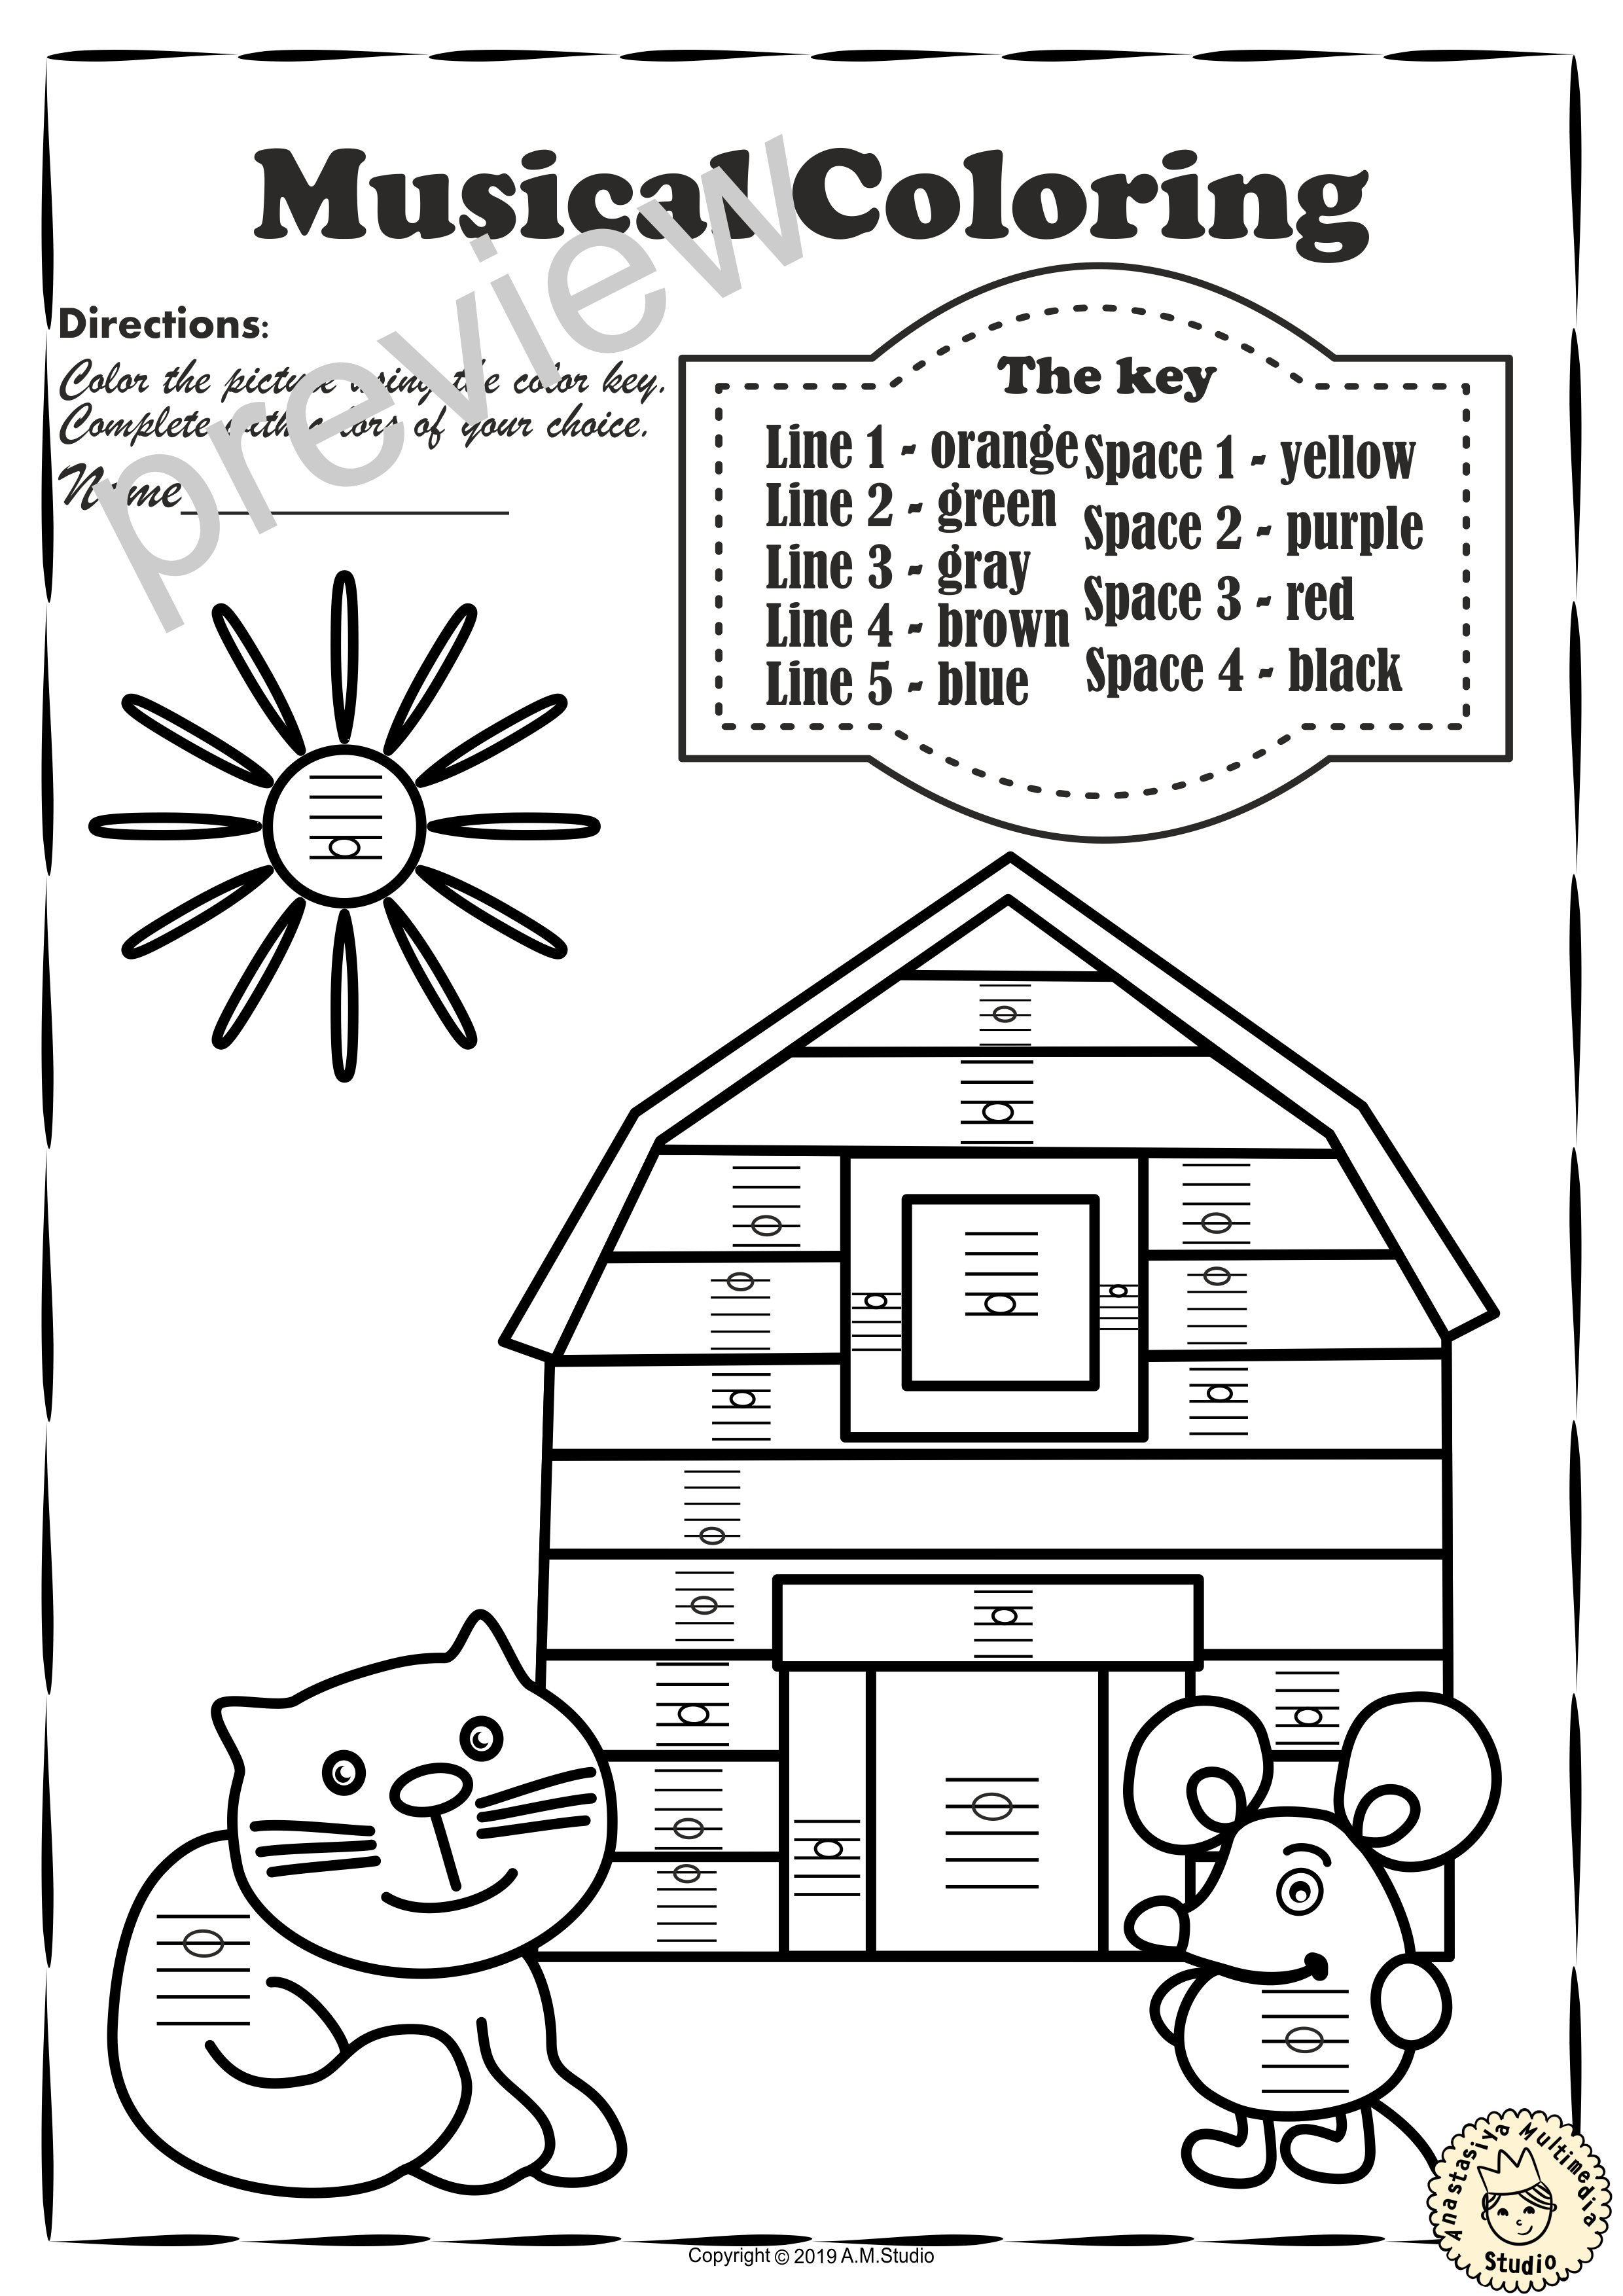 Musical Coloring Pages for Fall {Lines and Spaces} with answers (img # 3)